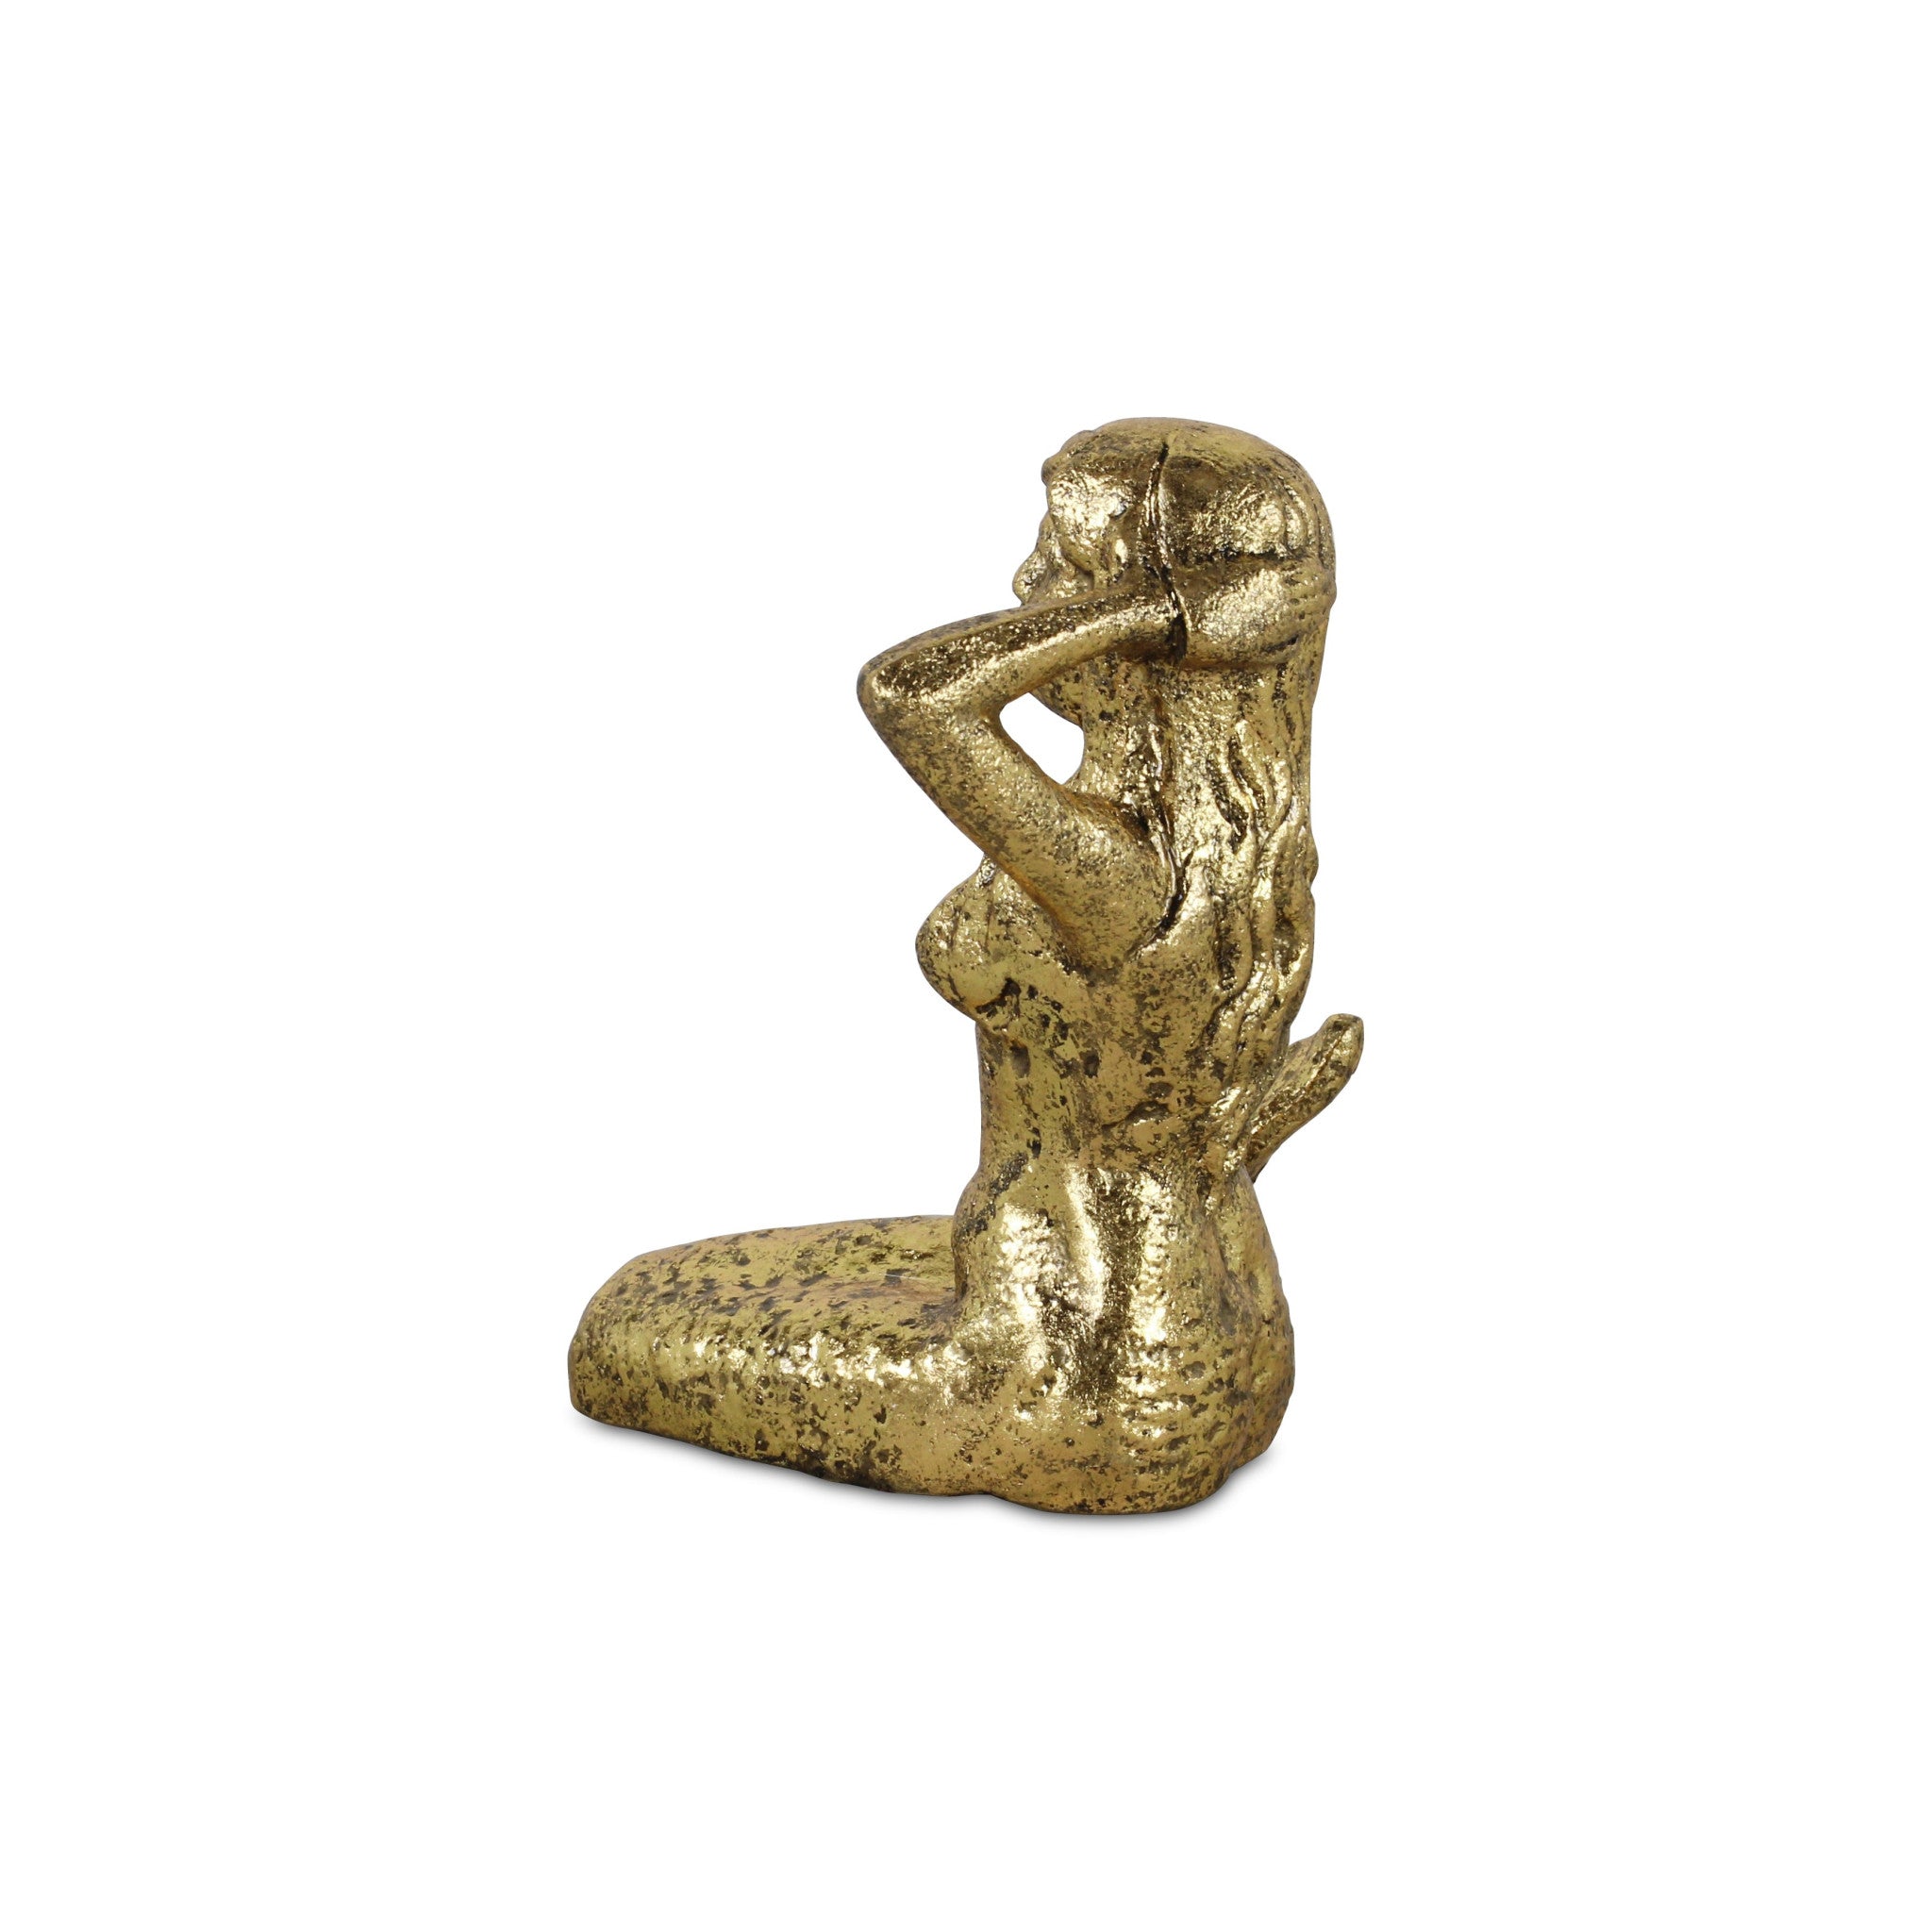 6" Antiqued Brass Cast Iron Mermaid Hand Painted Statue